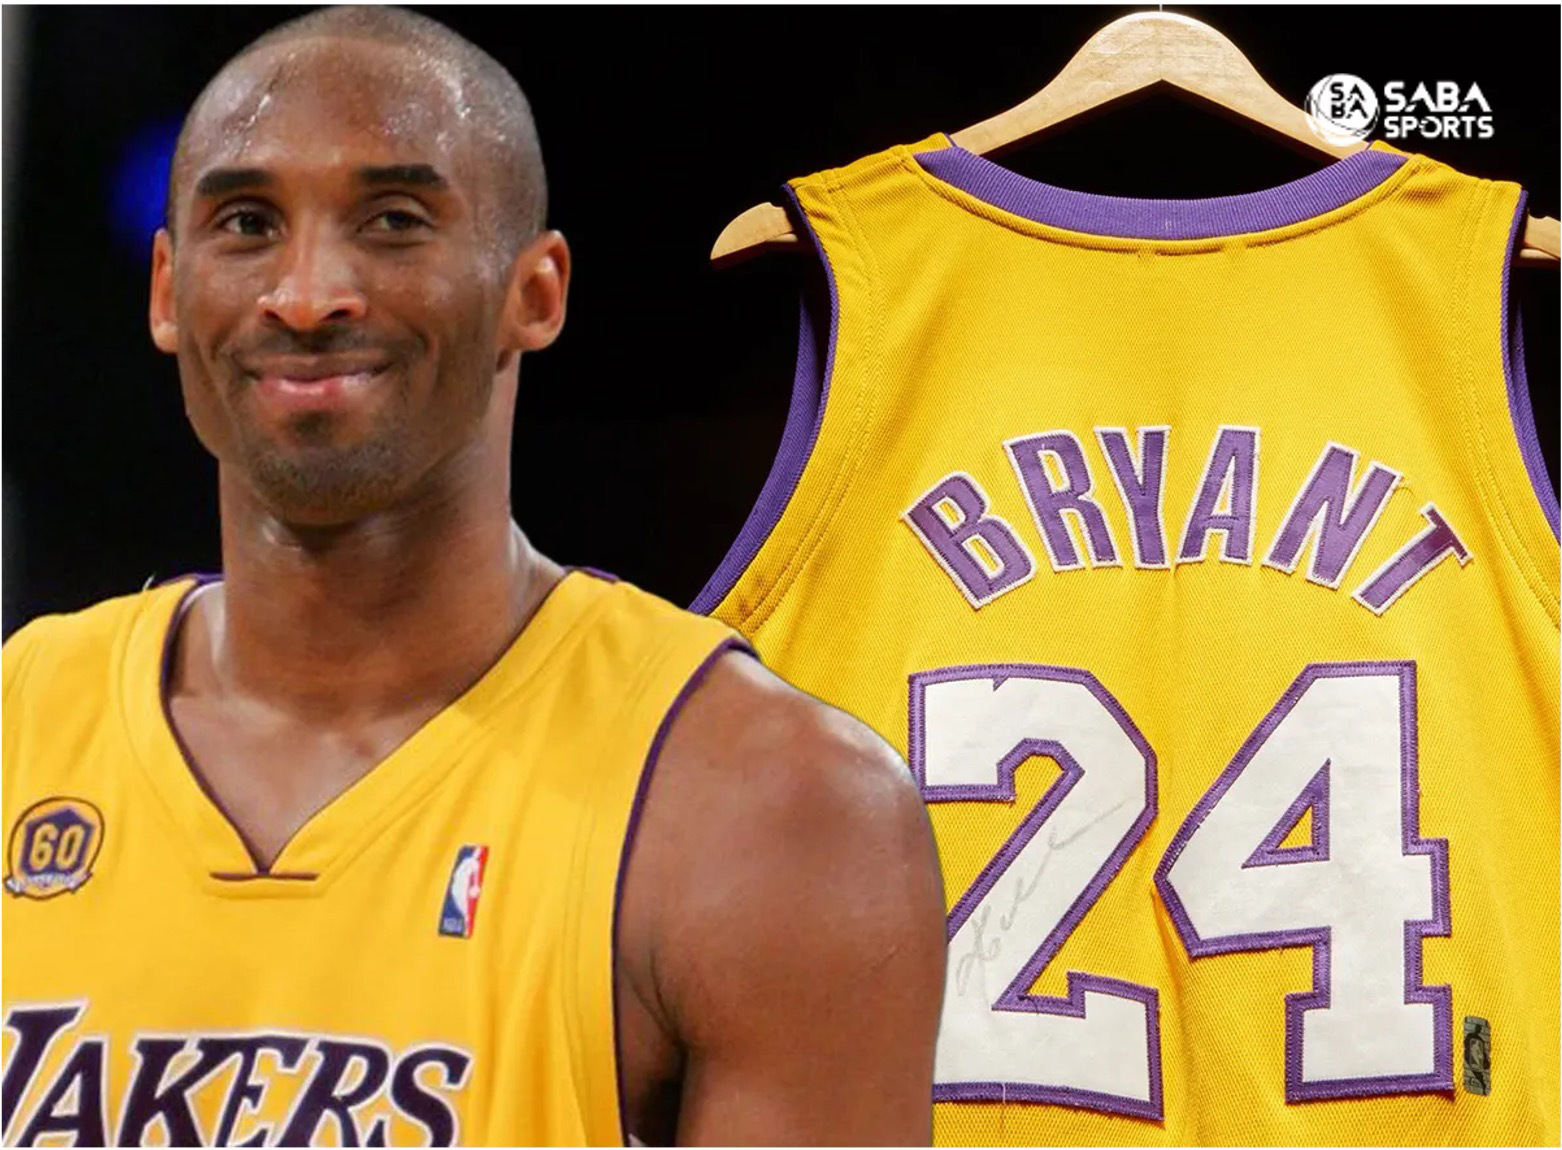 Record figure paid at auction for Kobe Bryant jersey